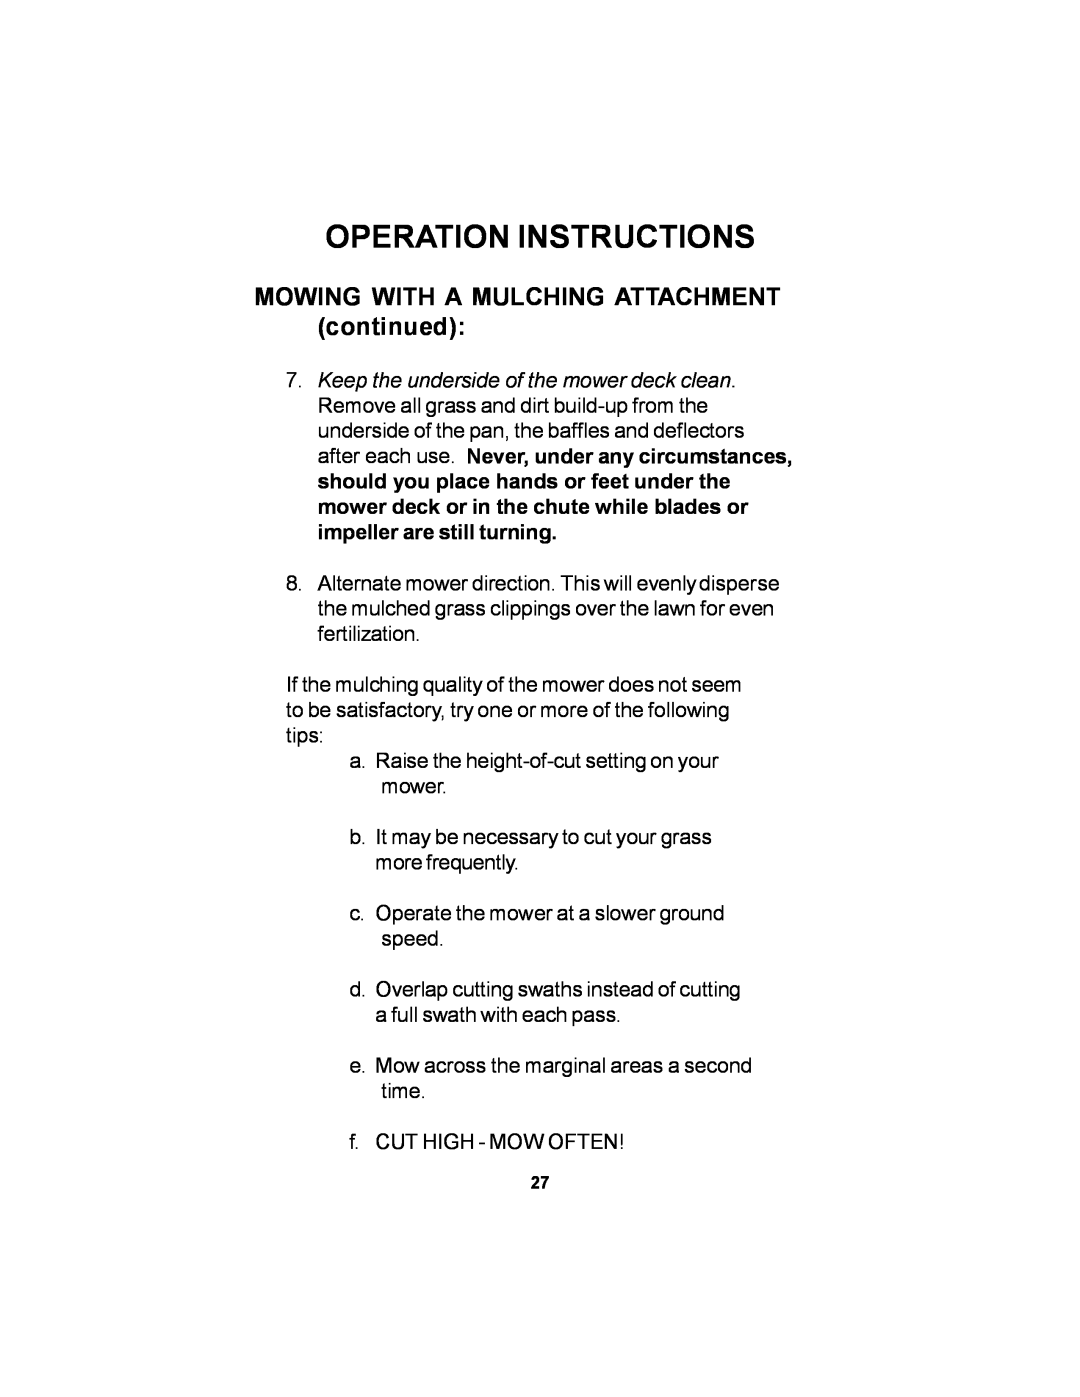 Dixon 14295-1005 manual MOWING WITH A MULCHING ATTACHMENT continued, Operation Instructions 